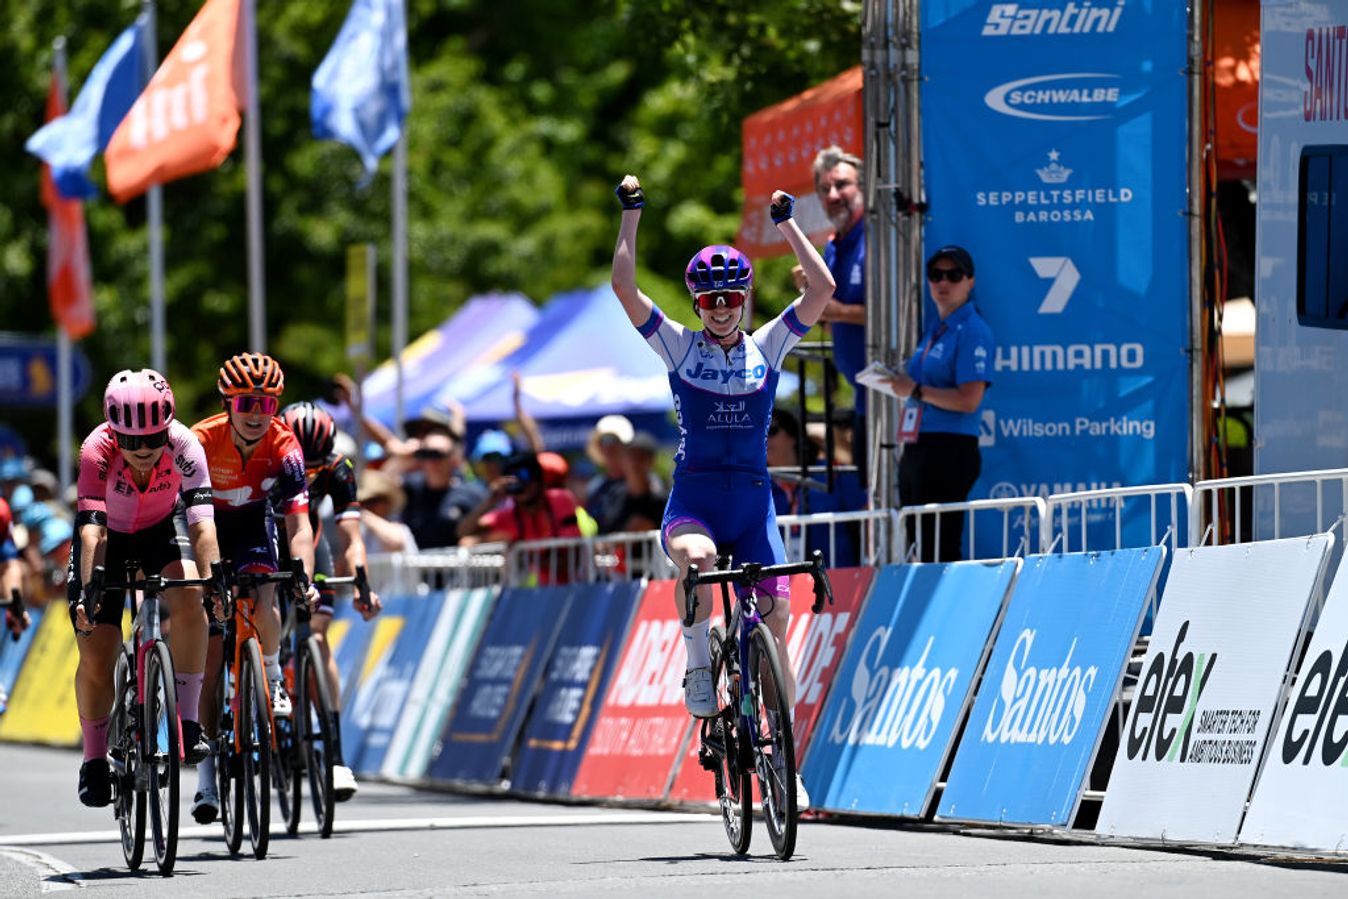 Alex Manly wins stage 2 of the Tour Down Under